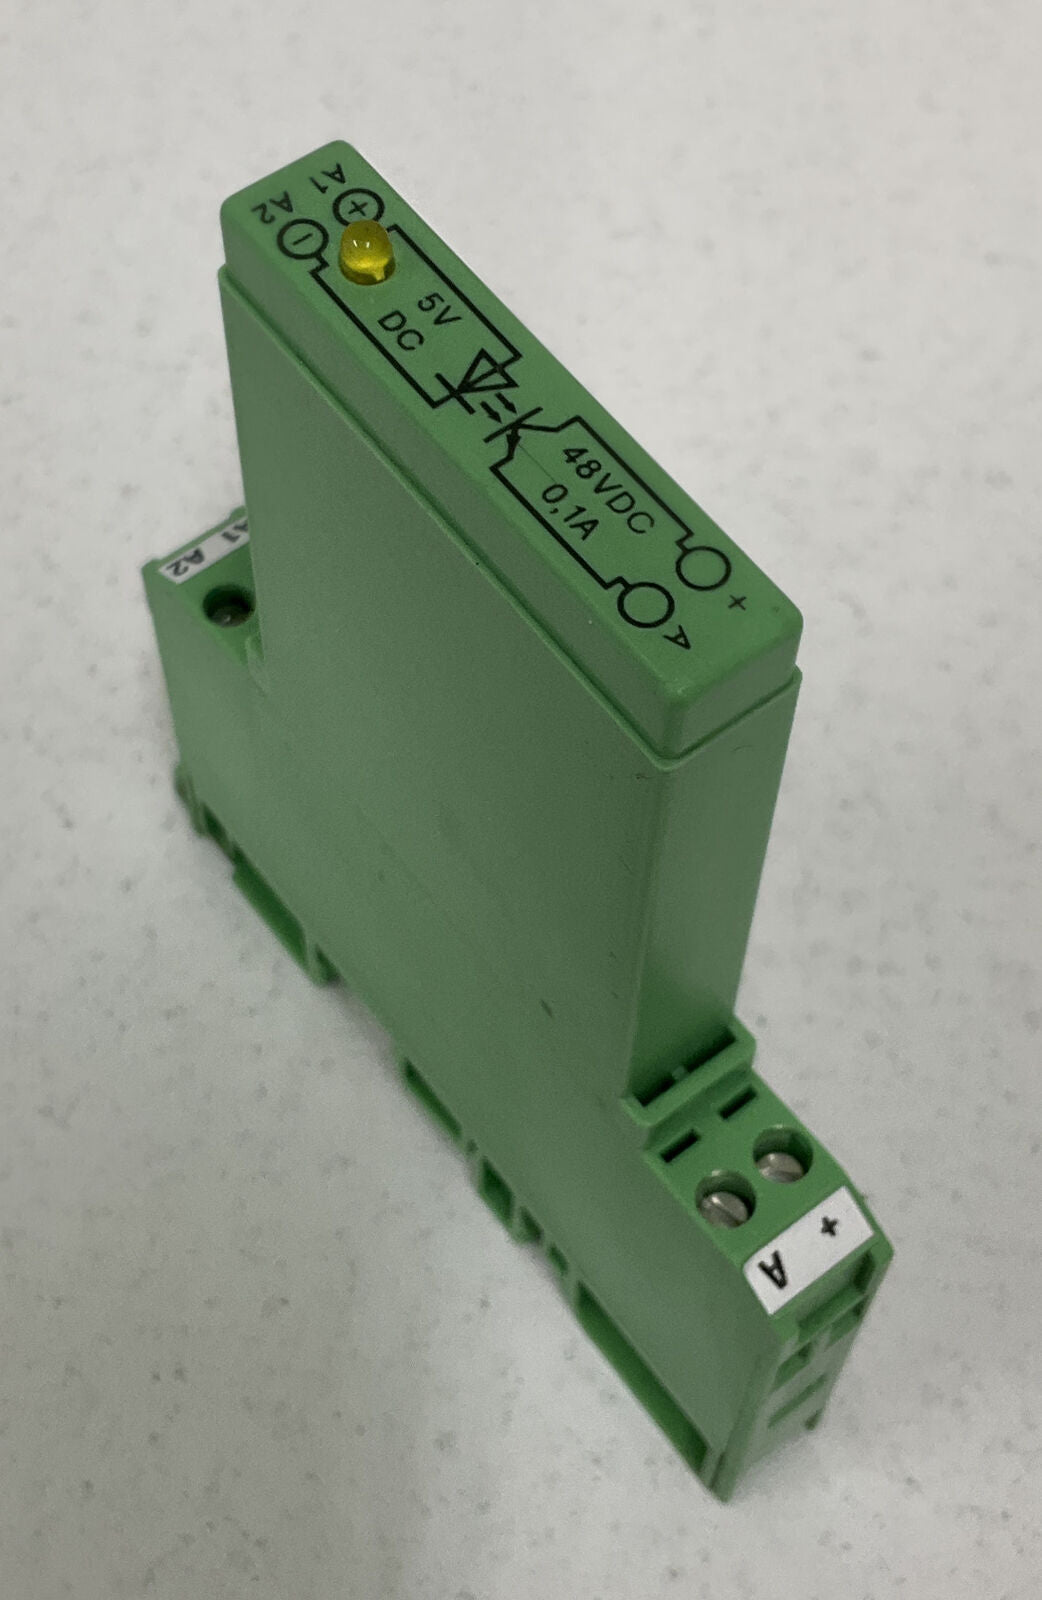 Phoenix Contact 2948885 / EMG 10-OE-5DC/48DC/100 Din Mount Relay (CL197)